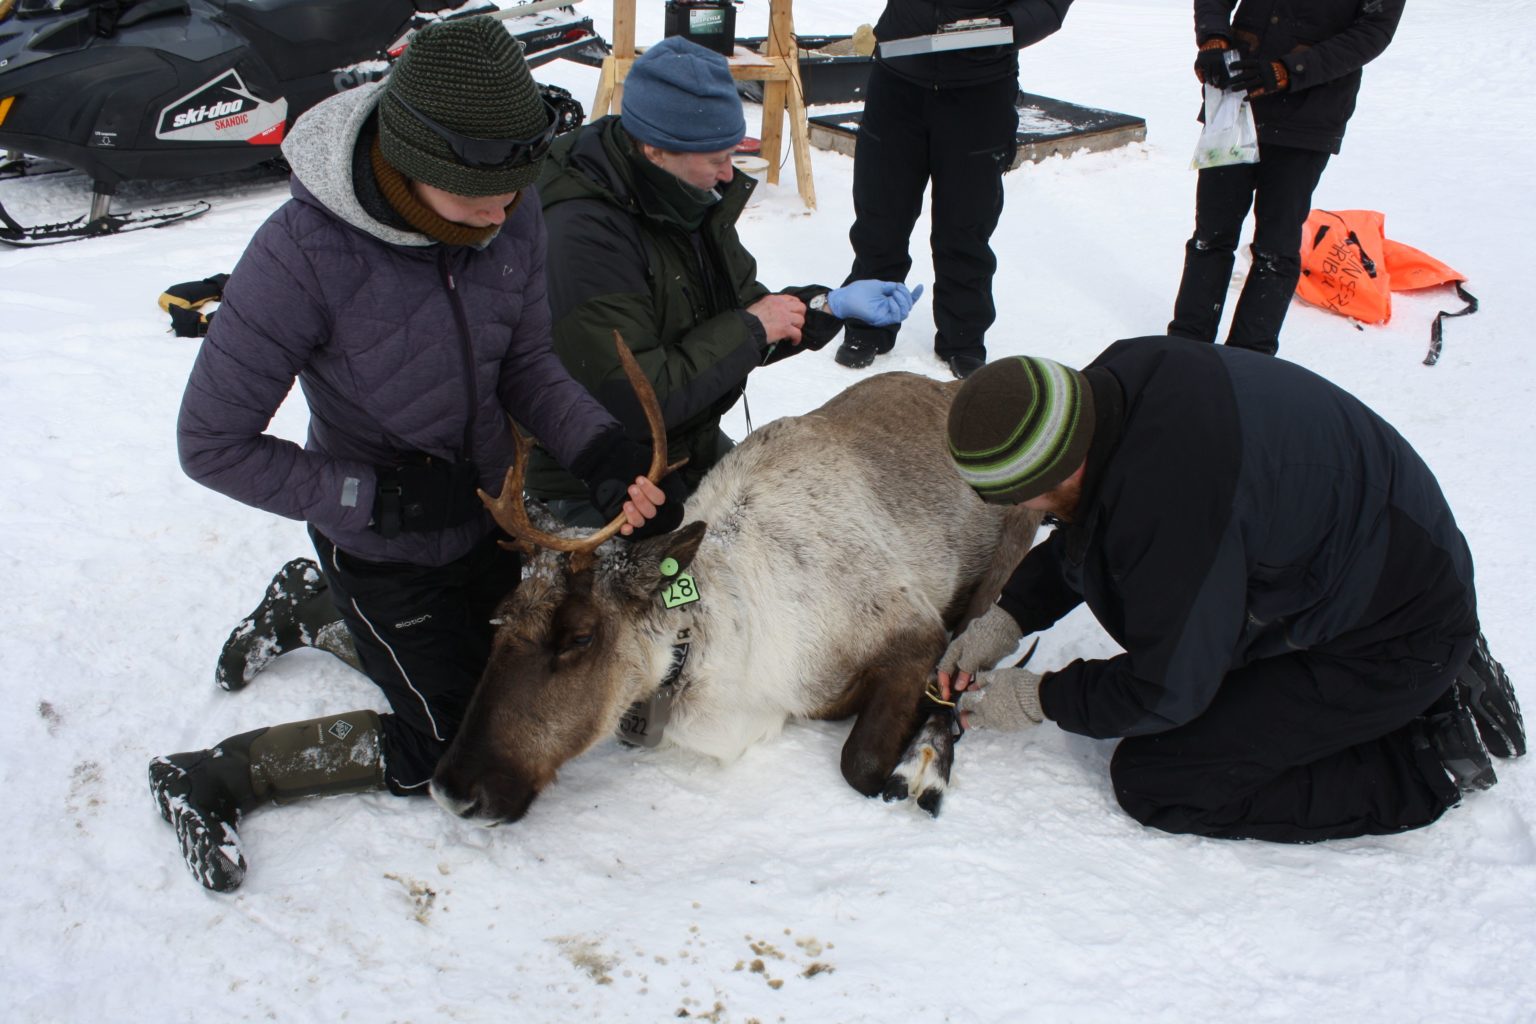 Three people holding and tagging a caribou on snowy ground